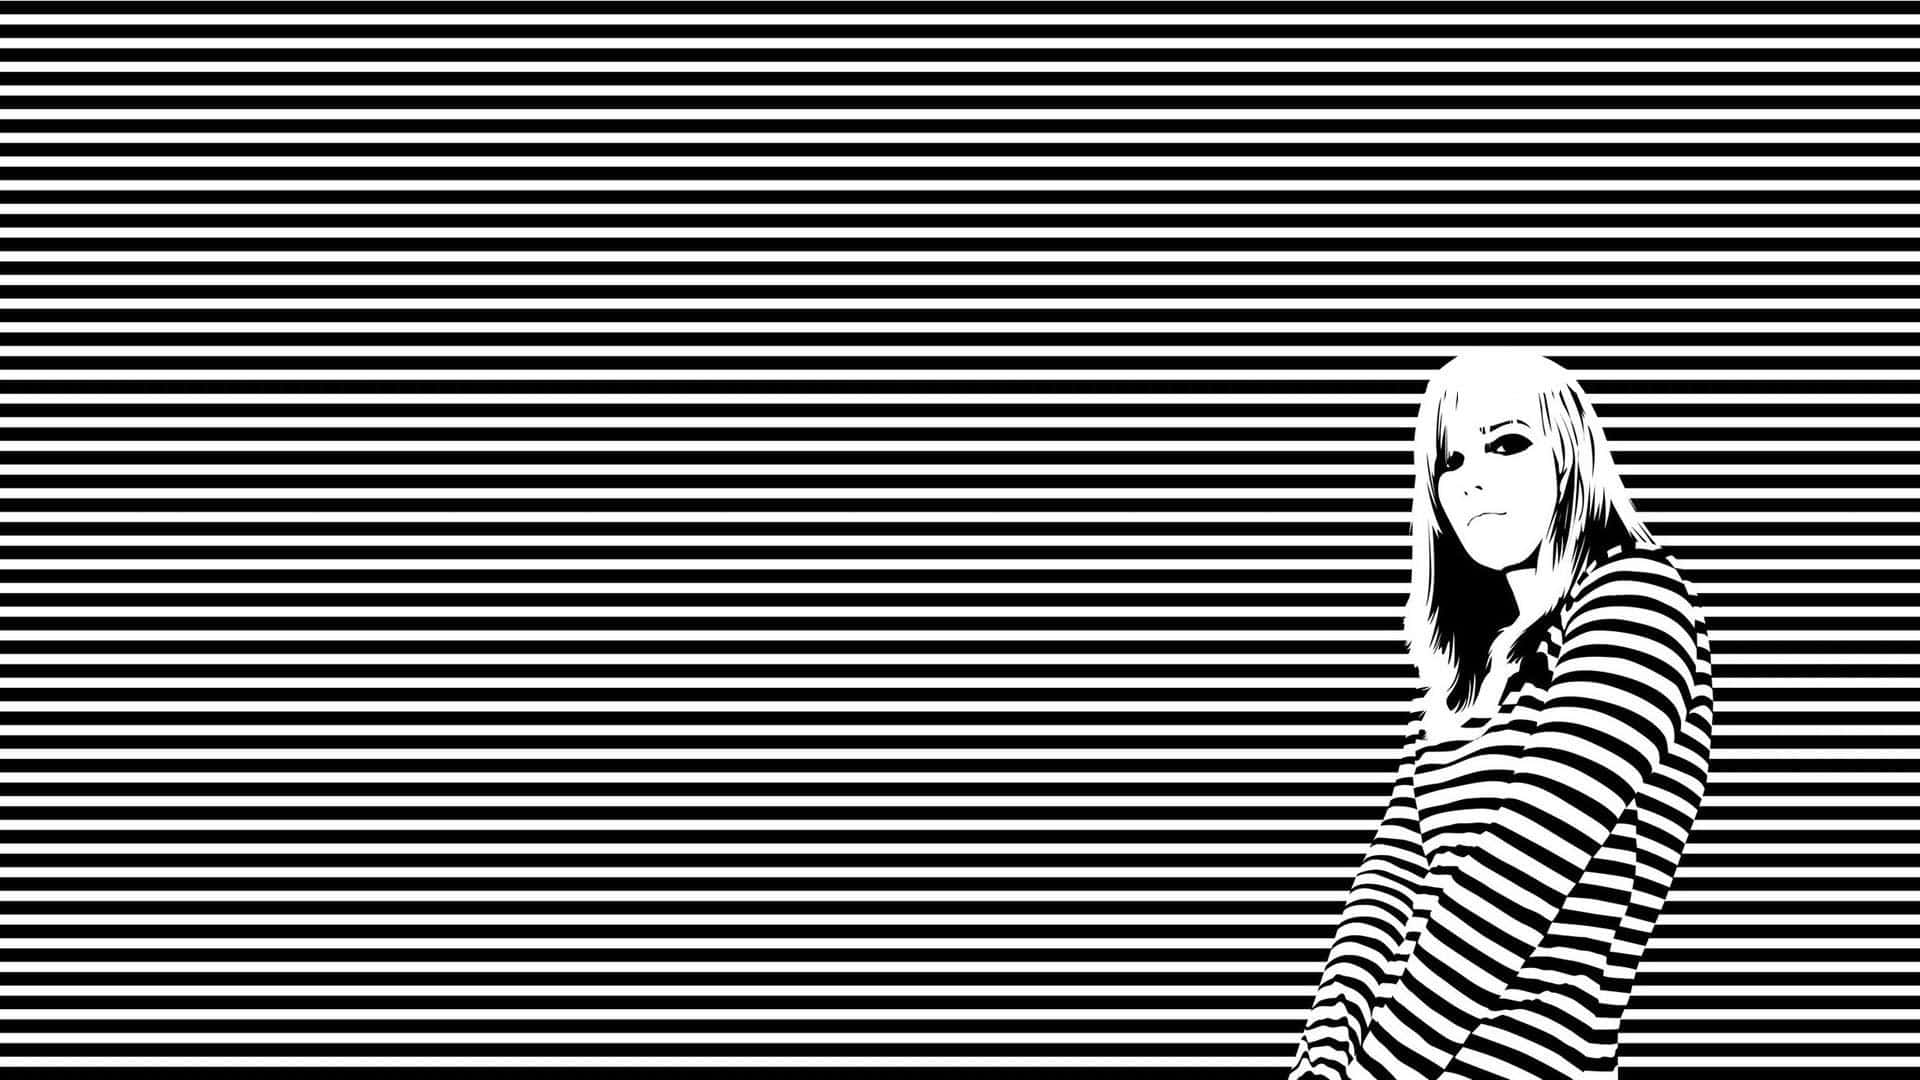 Woman In Black And White Stripes Wallpaper